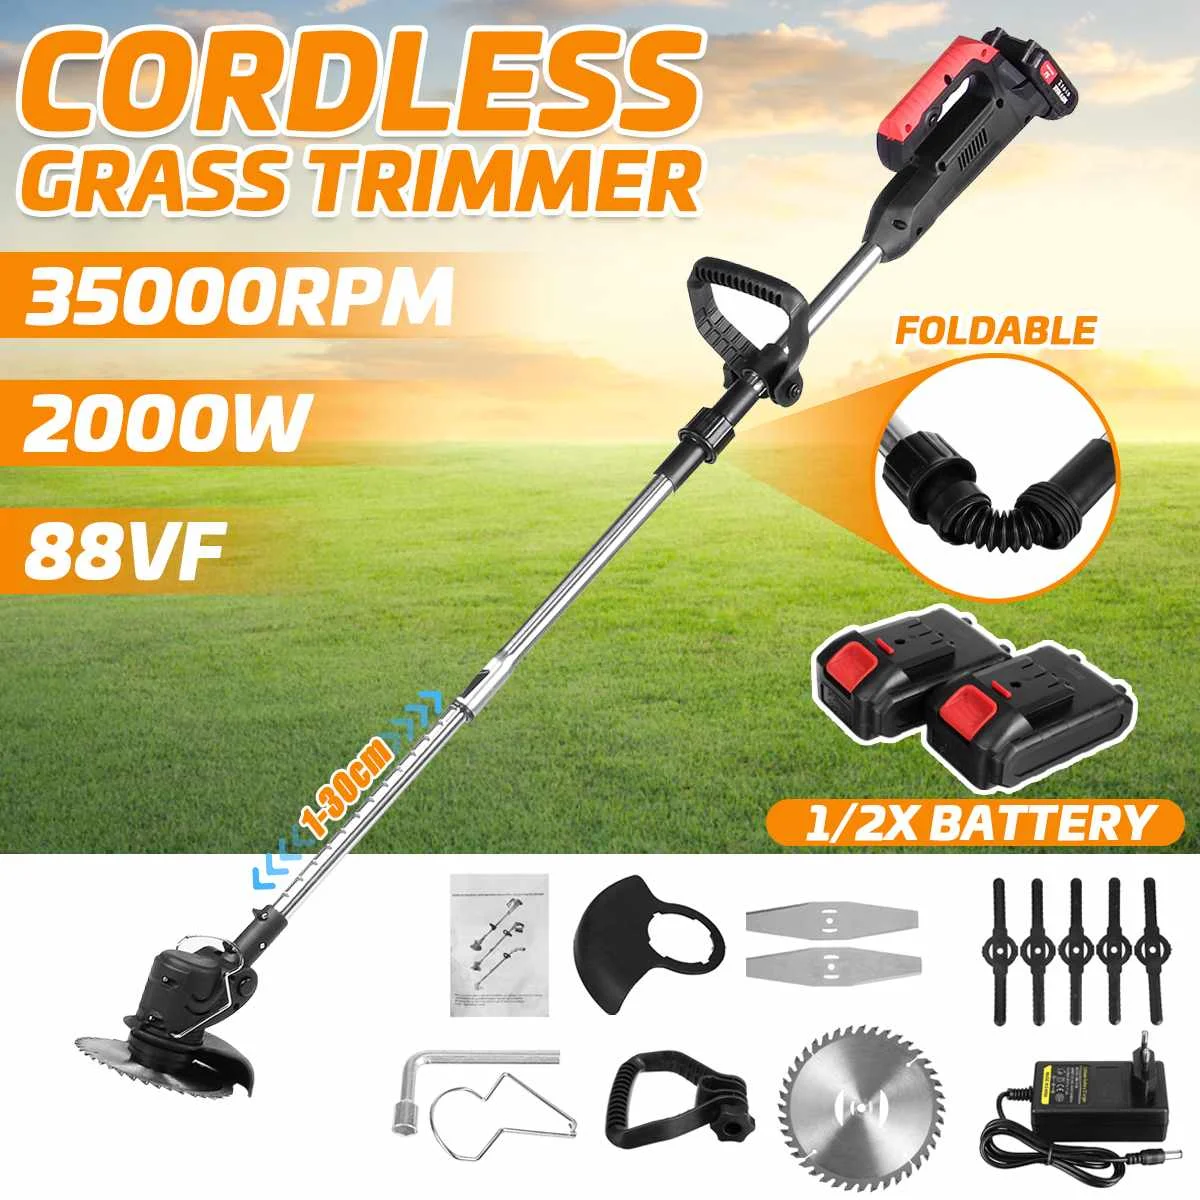 88VF 2000W Electric Grass Trimmer With 2PC Li-ion Battery Lawn Mower Powerful Cutter Weeder Cordless Cutting Machine Garden Tool